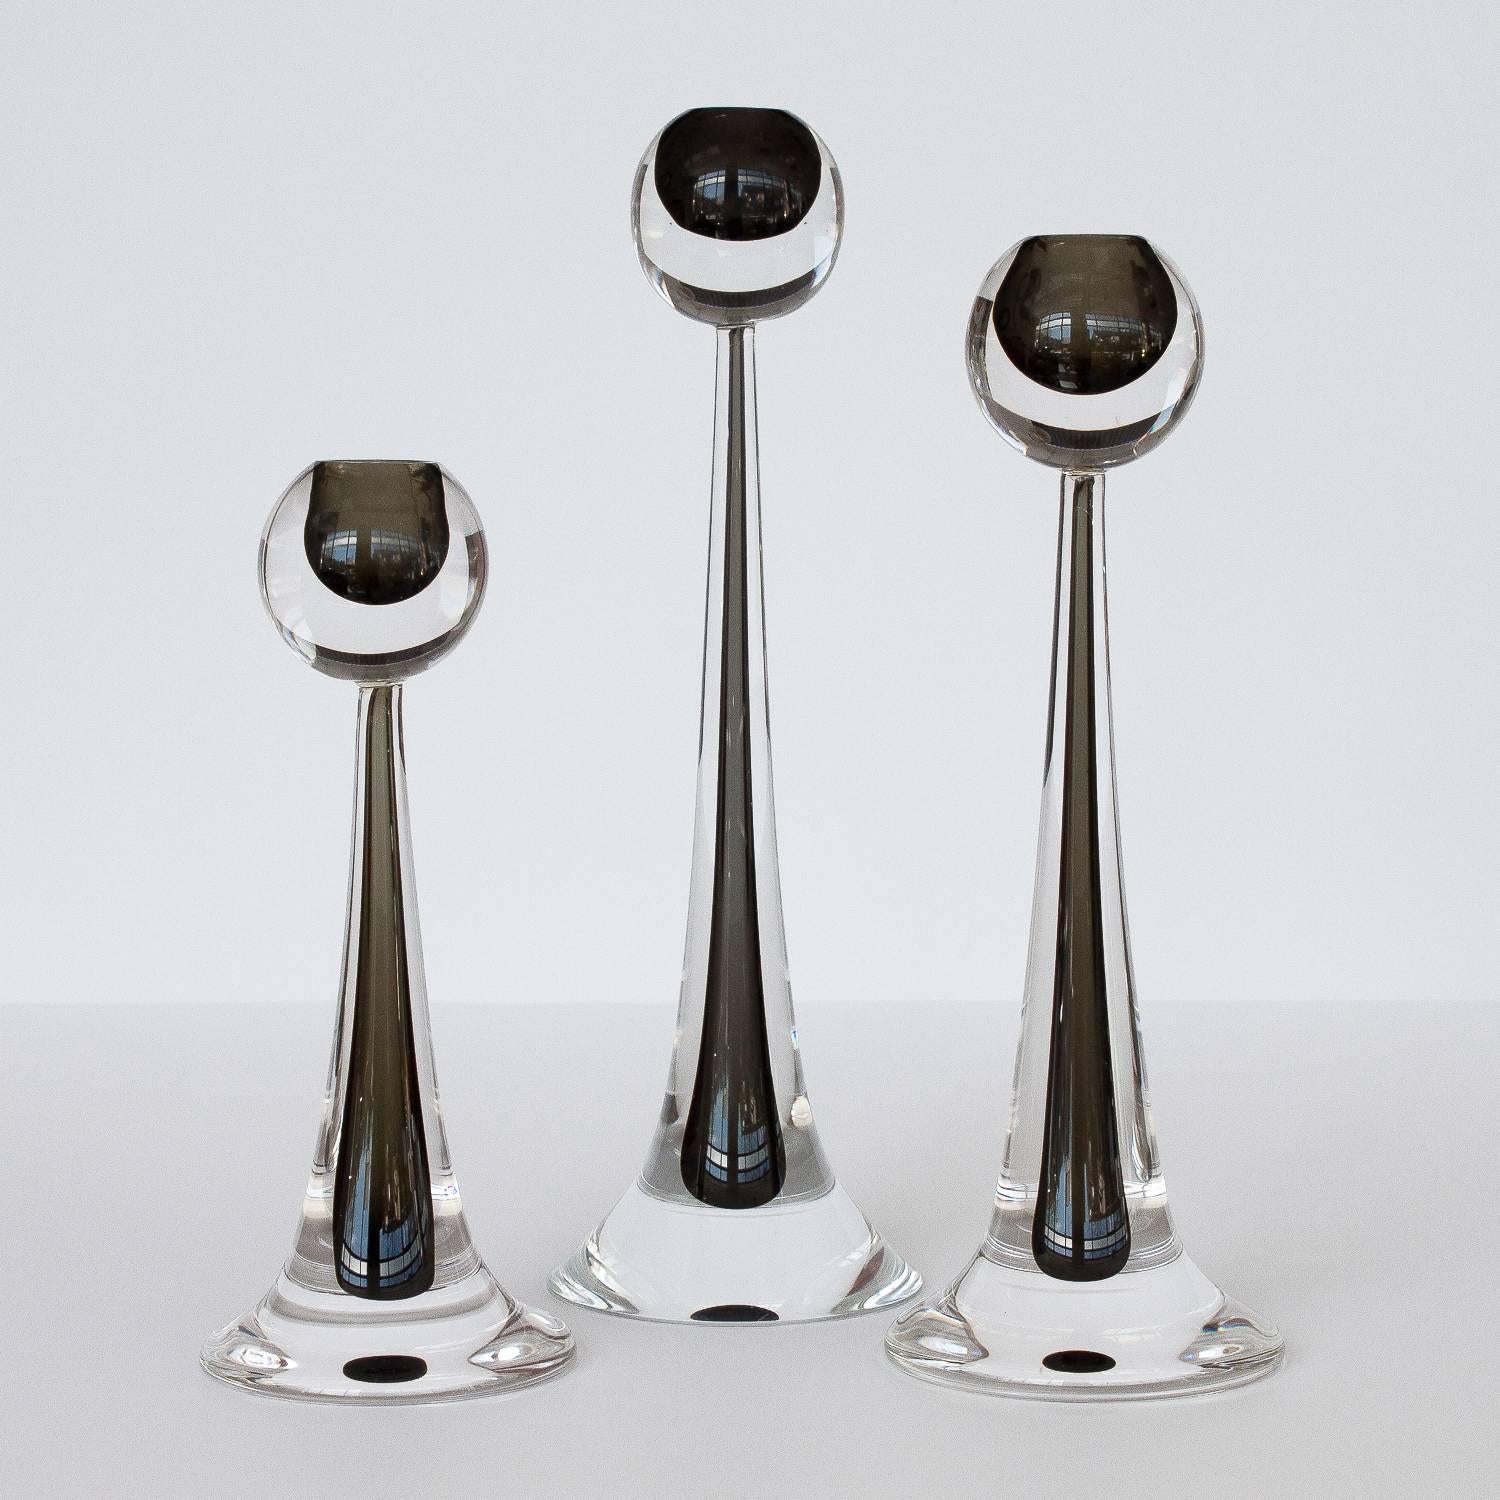 Set of three stunning Modernist handblown Murano glass candlesticks by Cenedese. These candlesticks feature a tapered teardrop design made of handblown Murano glass. Each candlesticks features a spherical topper that is accentuated with an interior